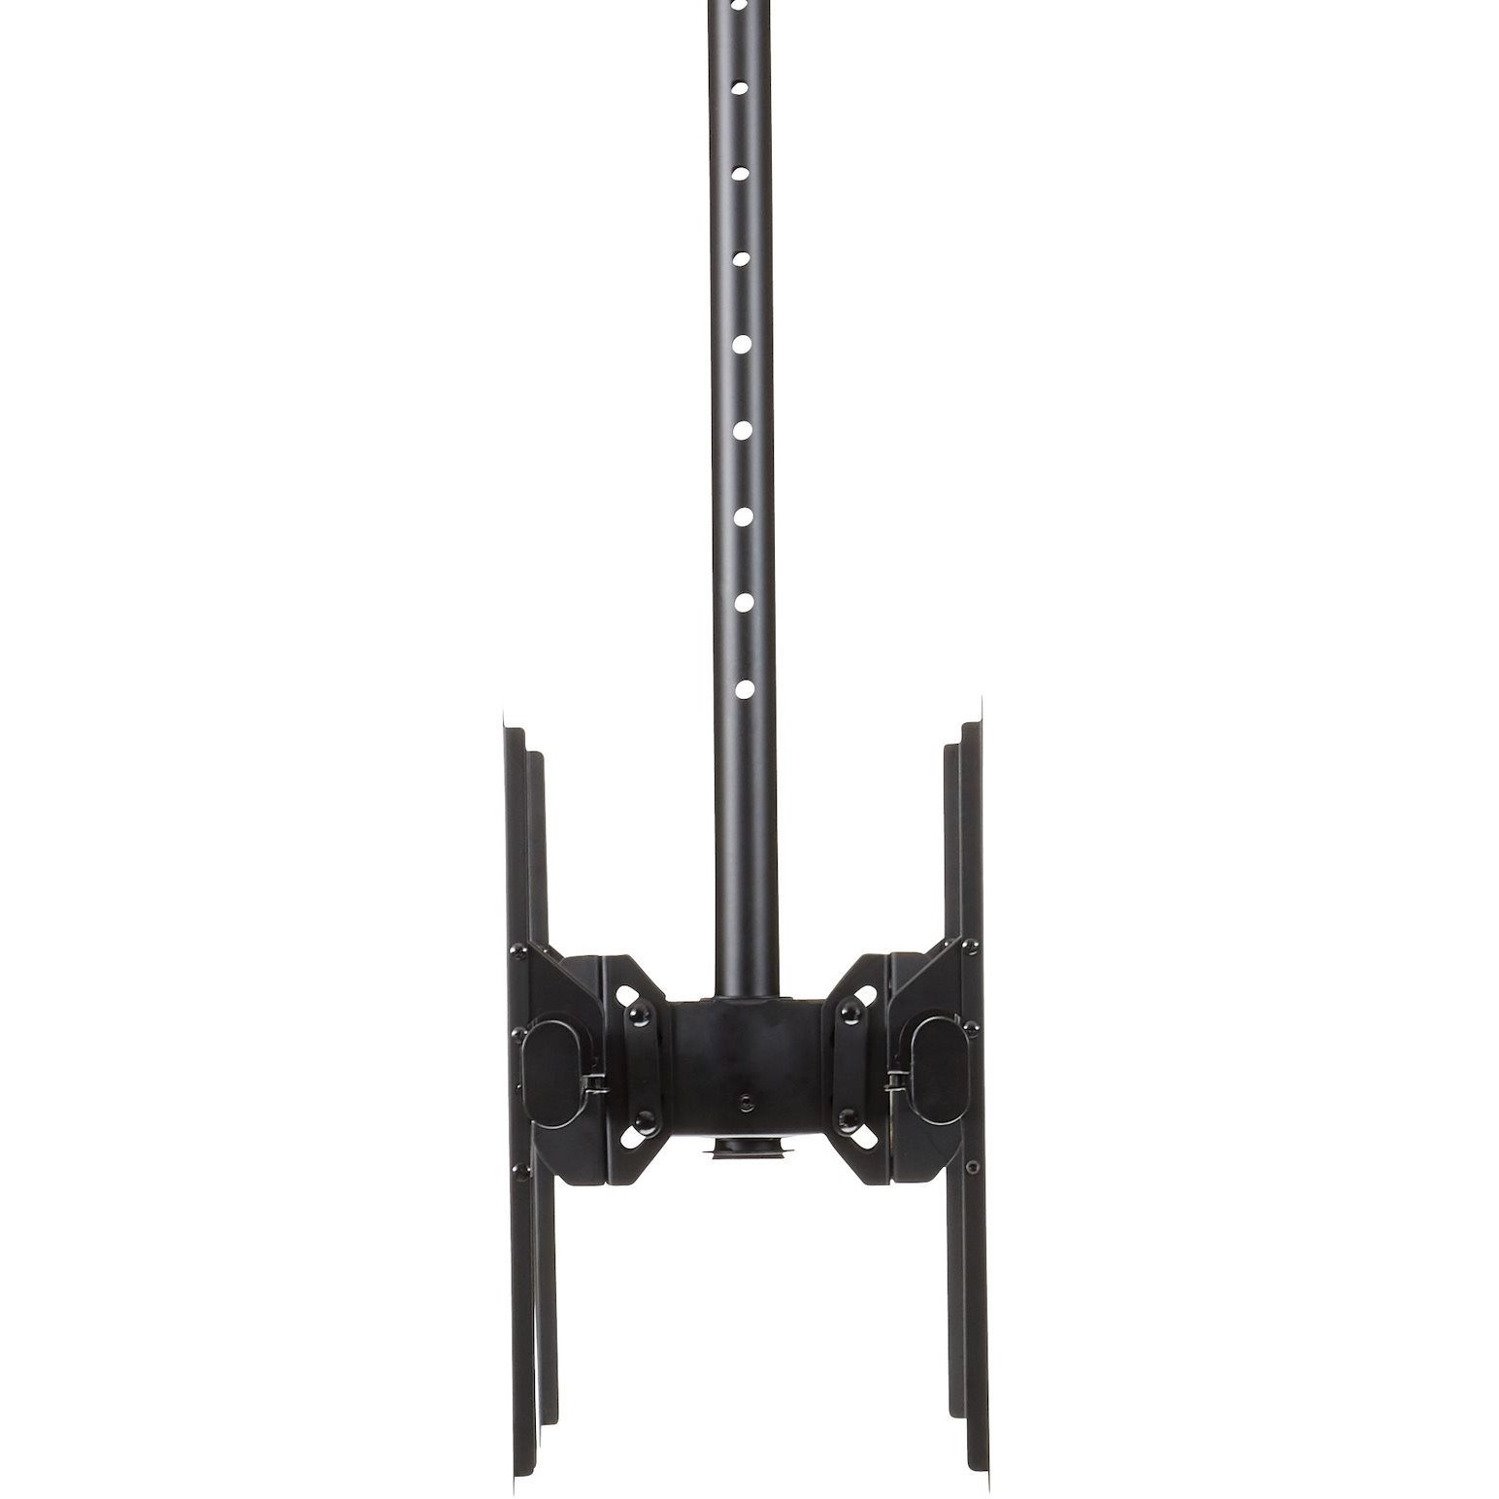 StarTech.com Dual TV Ceiling Mount, Back-to-Back Hanging Dual Screen VESA Pole Mount for 32"-75" TVs - Height Adjustable Telescopic Pole